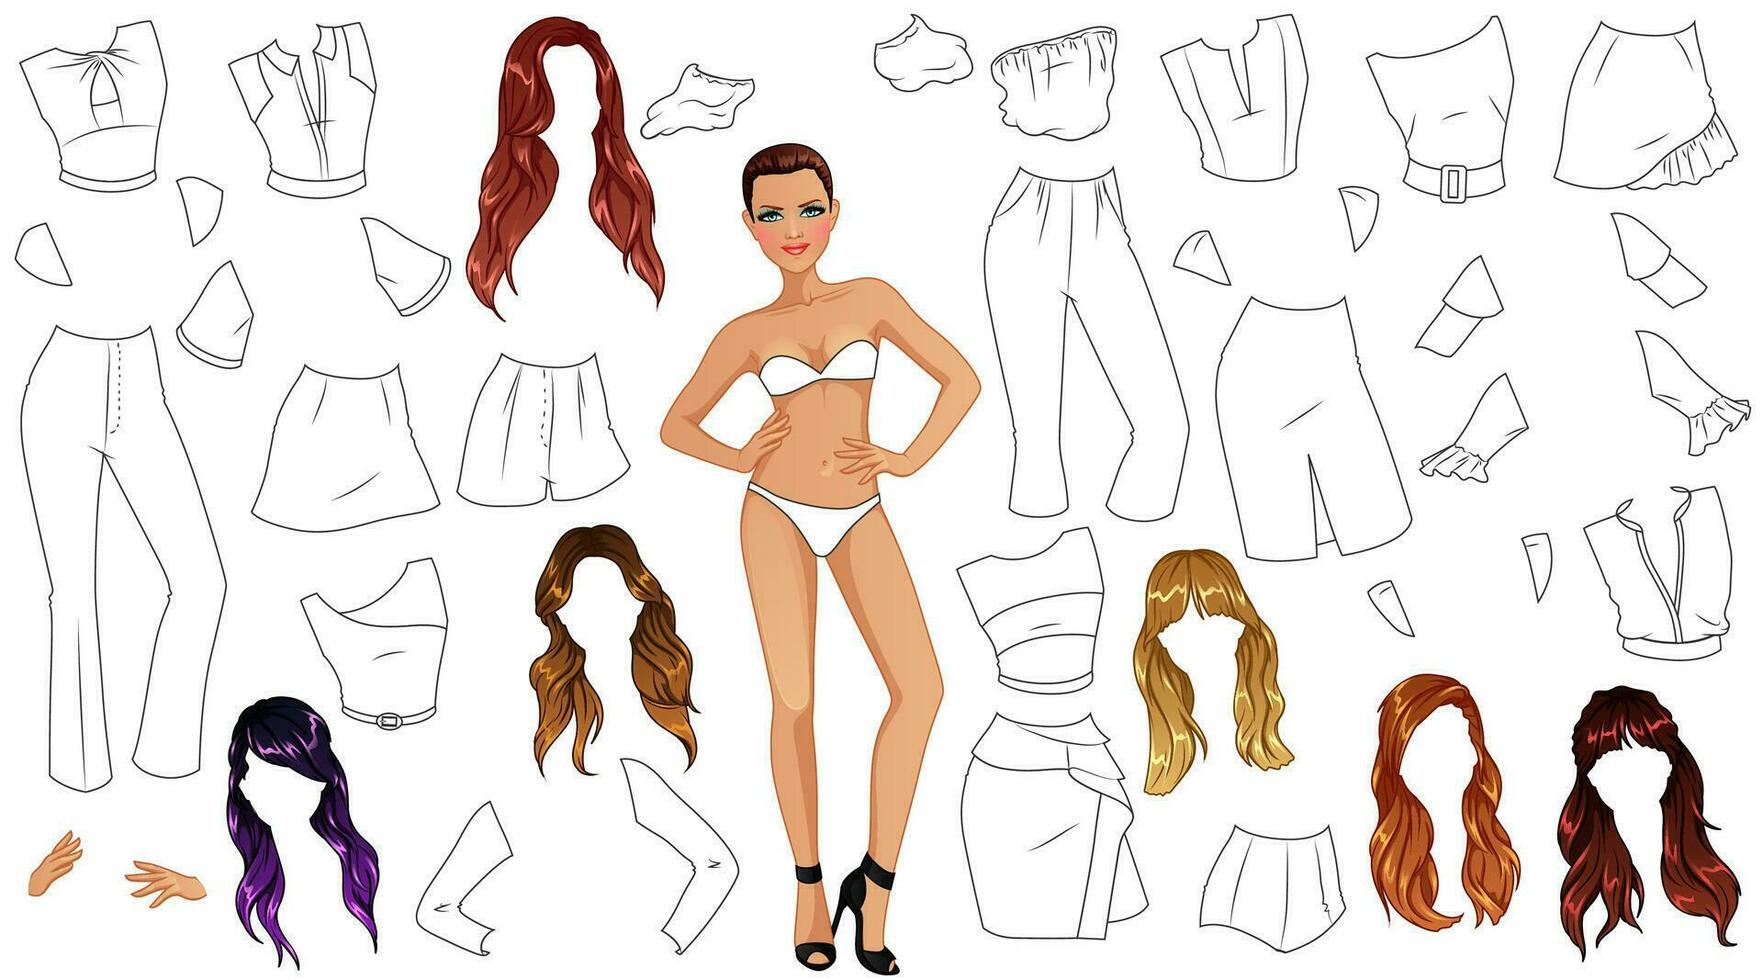 Fashion Queen Coloring Page Paper Doll with Cute Cartoon Character, Clothes and Hairstyles. Vector Illustration